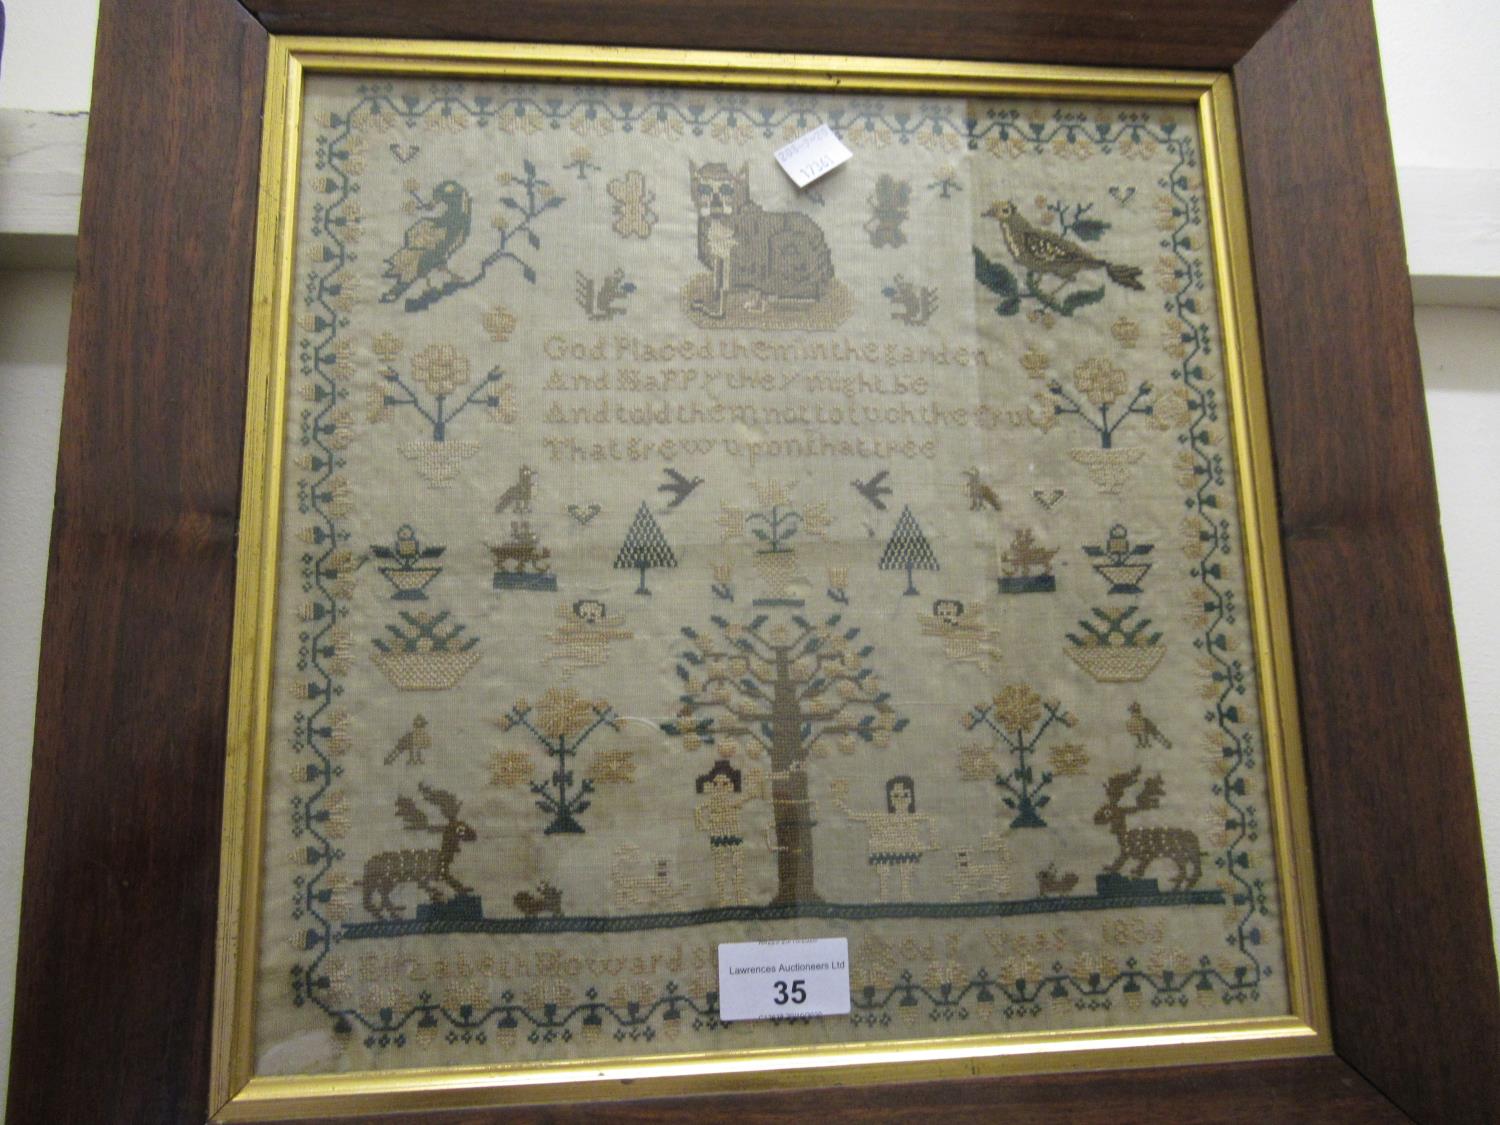 William IV needlepoint sampler of pictorial motto and Adam and Eve design, signed Elizabeth